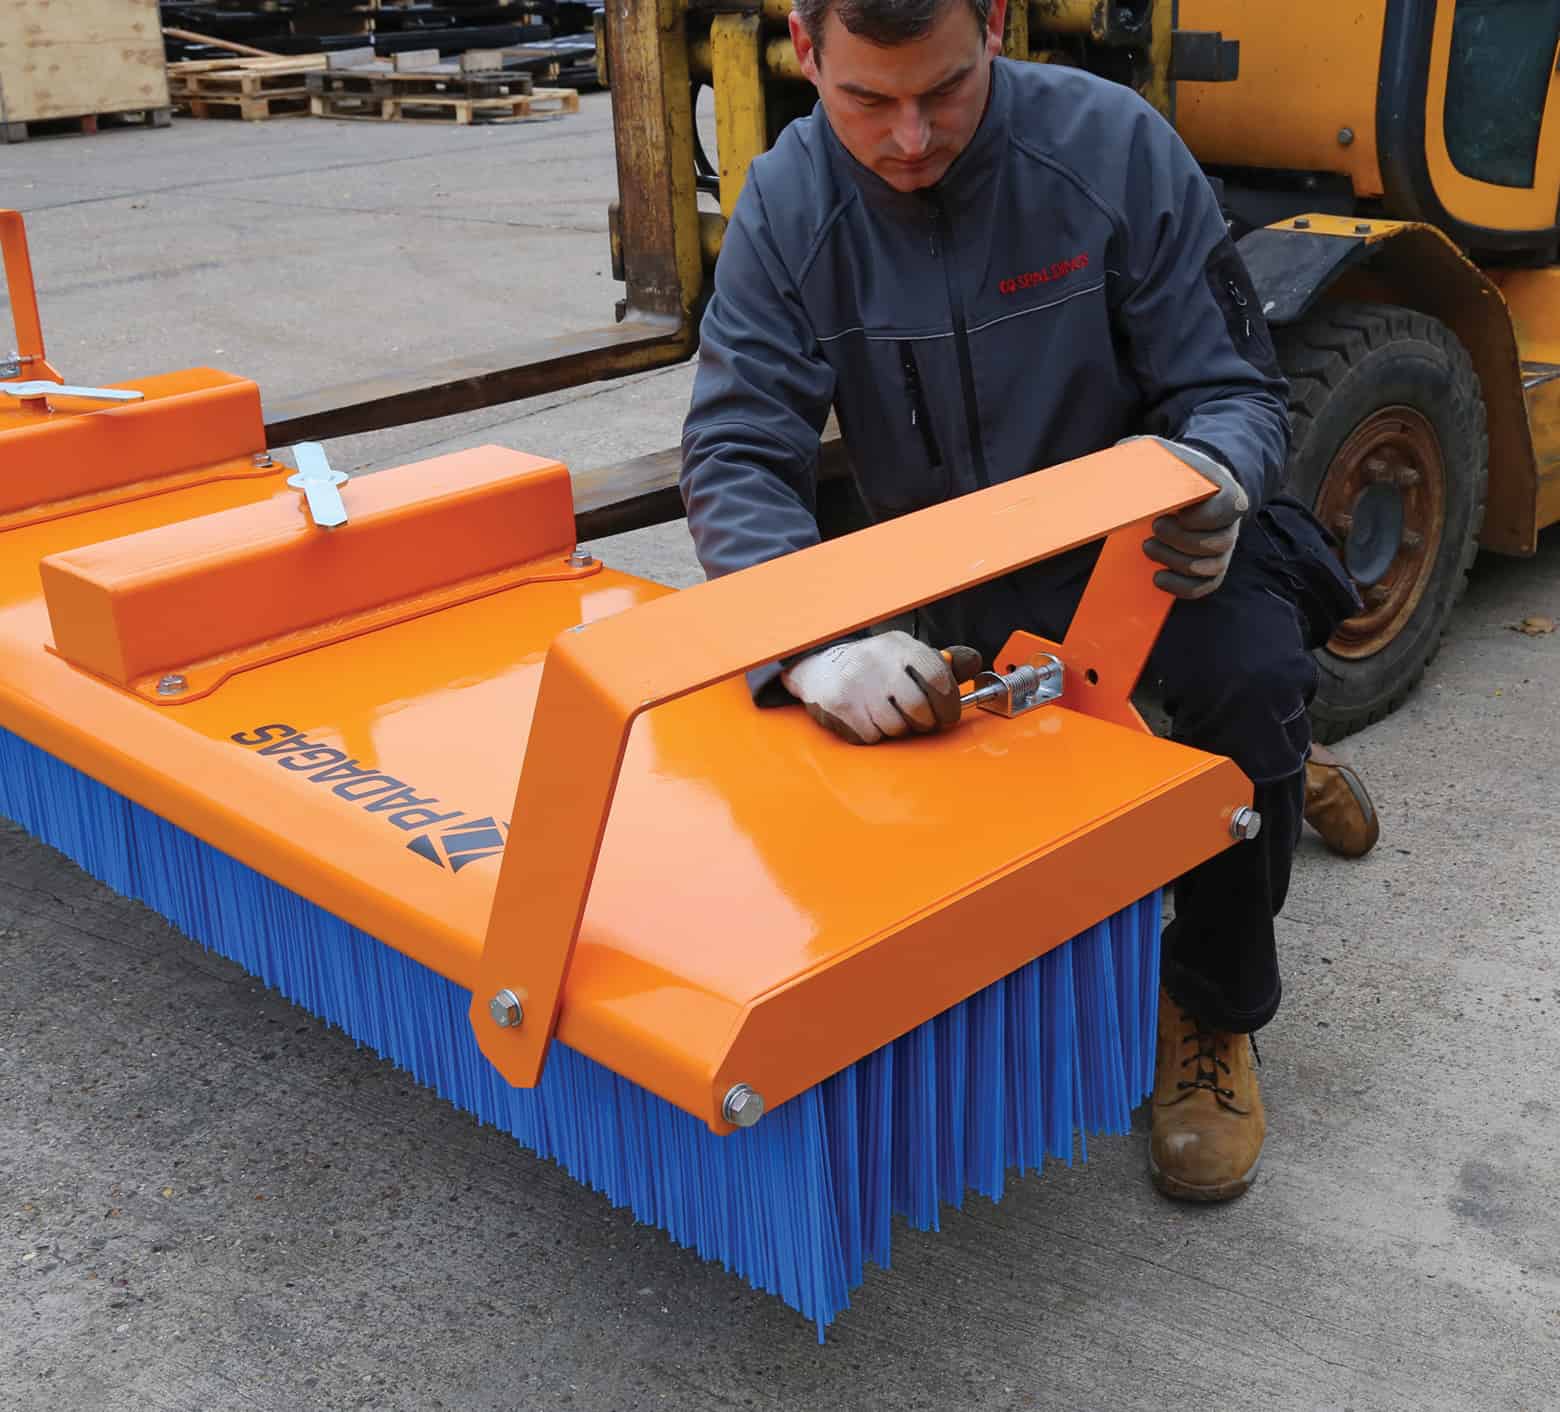 Push-Broom and Bucket Brush from Spaldings provide simple but effective sweeping solutions